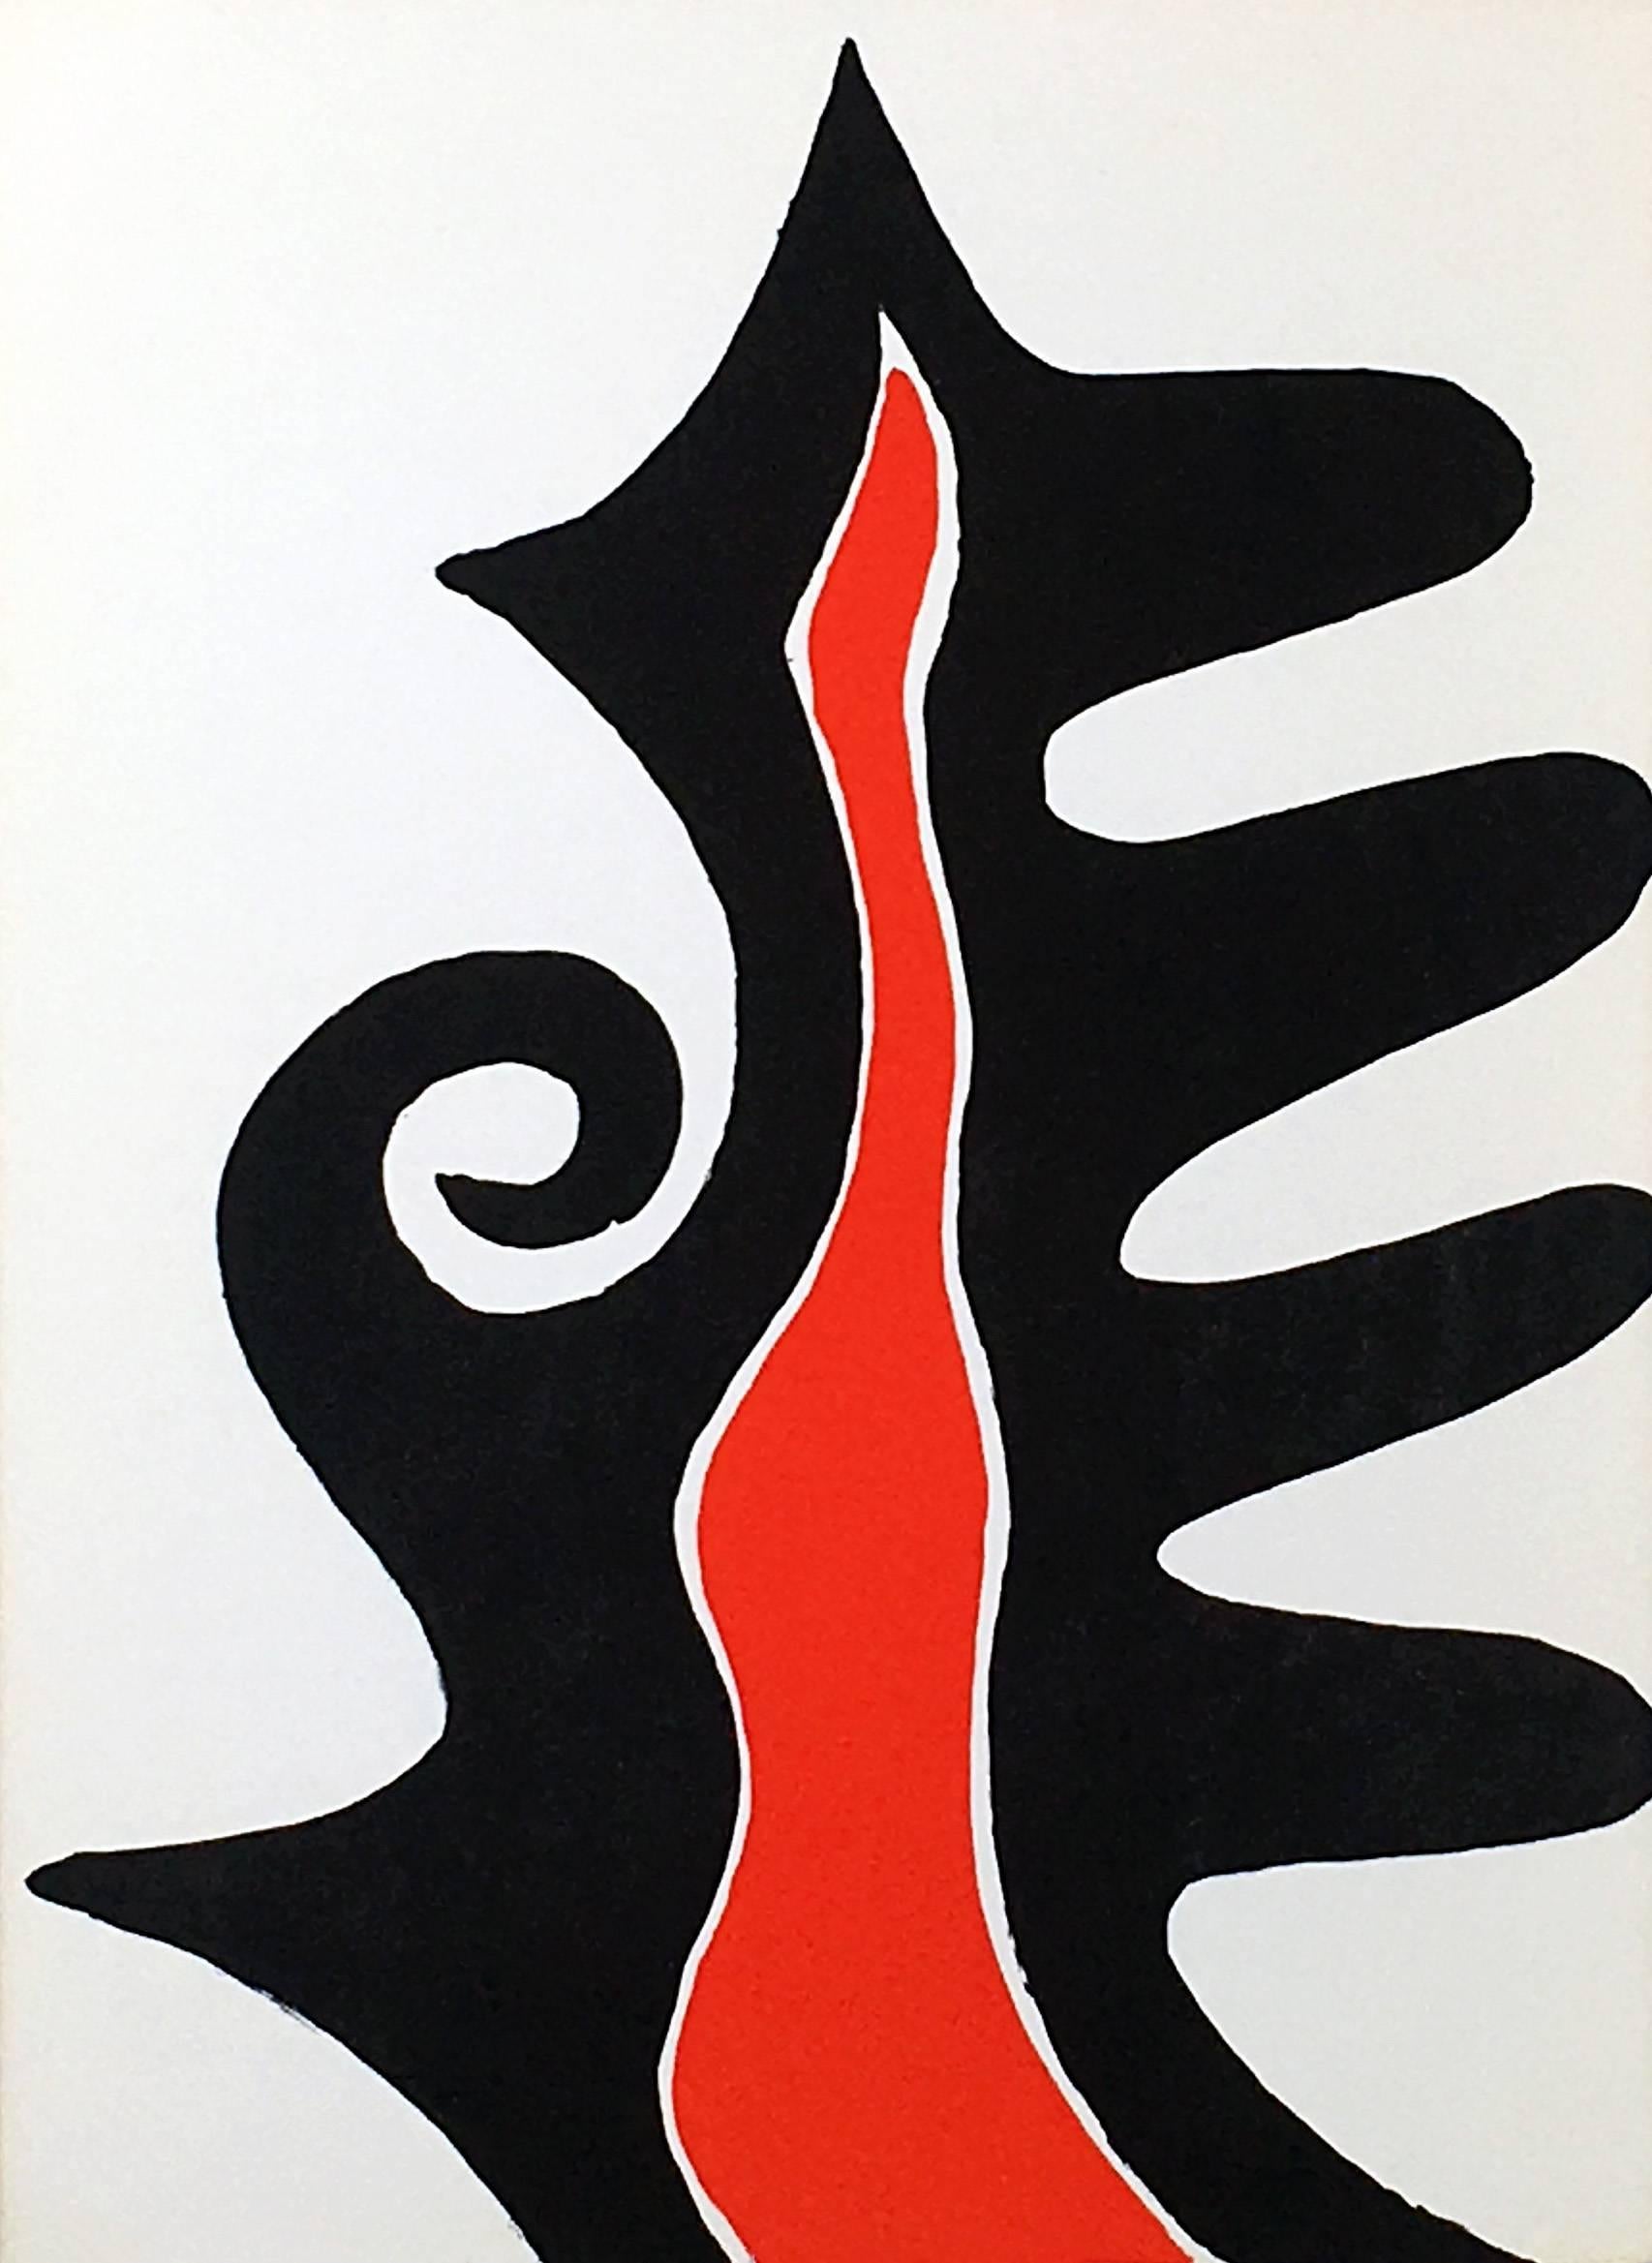 Vintage original 1970s Alexander Calder Lithograph 
Published by: Galerie Maeght, Paris, 1973
Portfolio: Derriere Le Miroir

Lithograph in colors; 1973
11 x 15 inches
Very good condition for its age
Unsigned from an edition of unknown 


Related